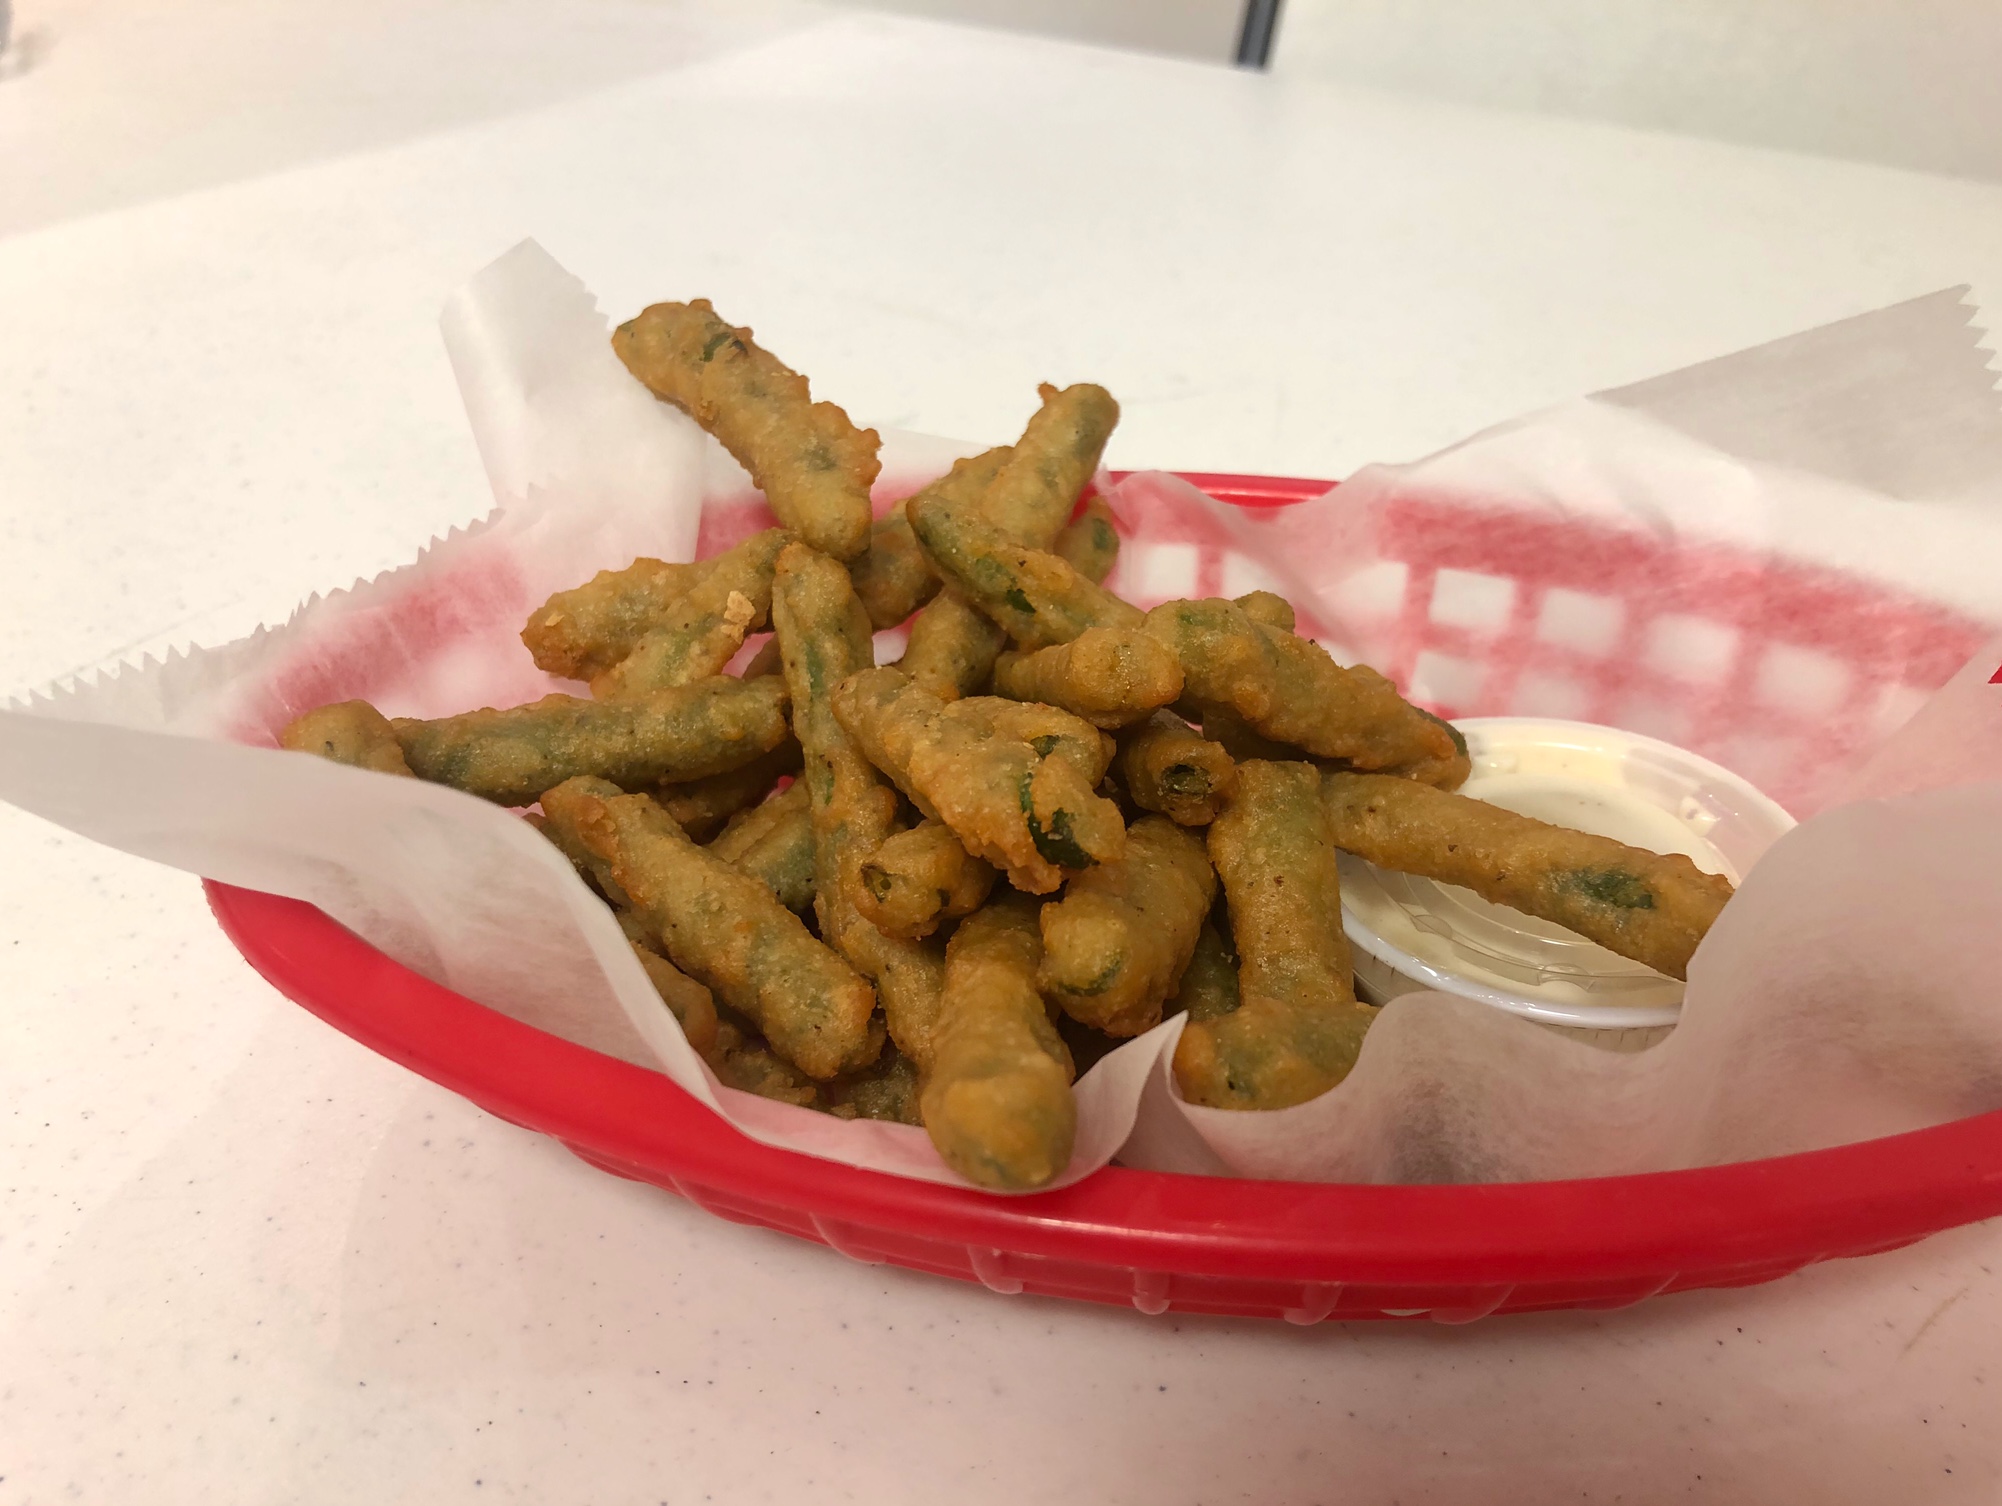 In a red plastic basket, there is a serving of fried green beans on parchment paper. Photo by Alyssa Buckley.